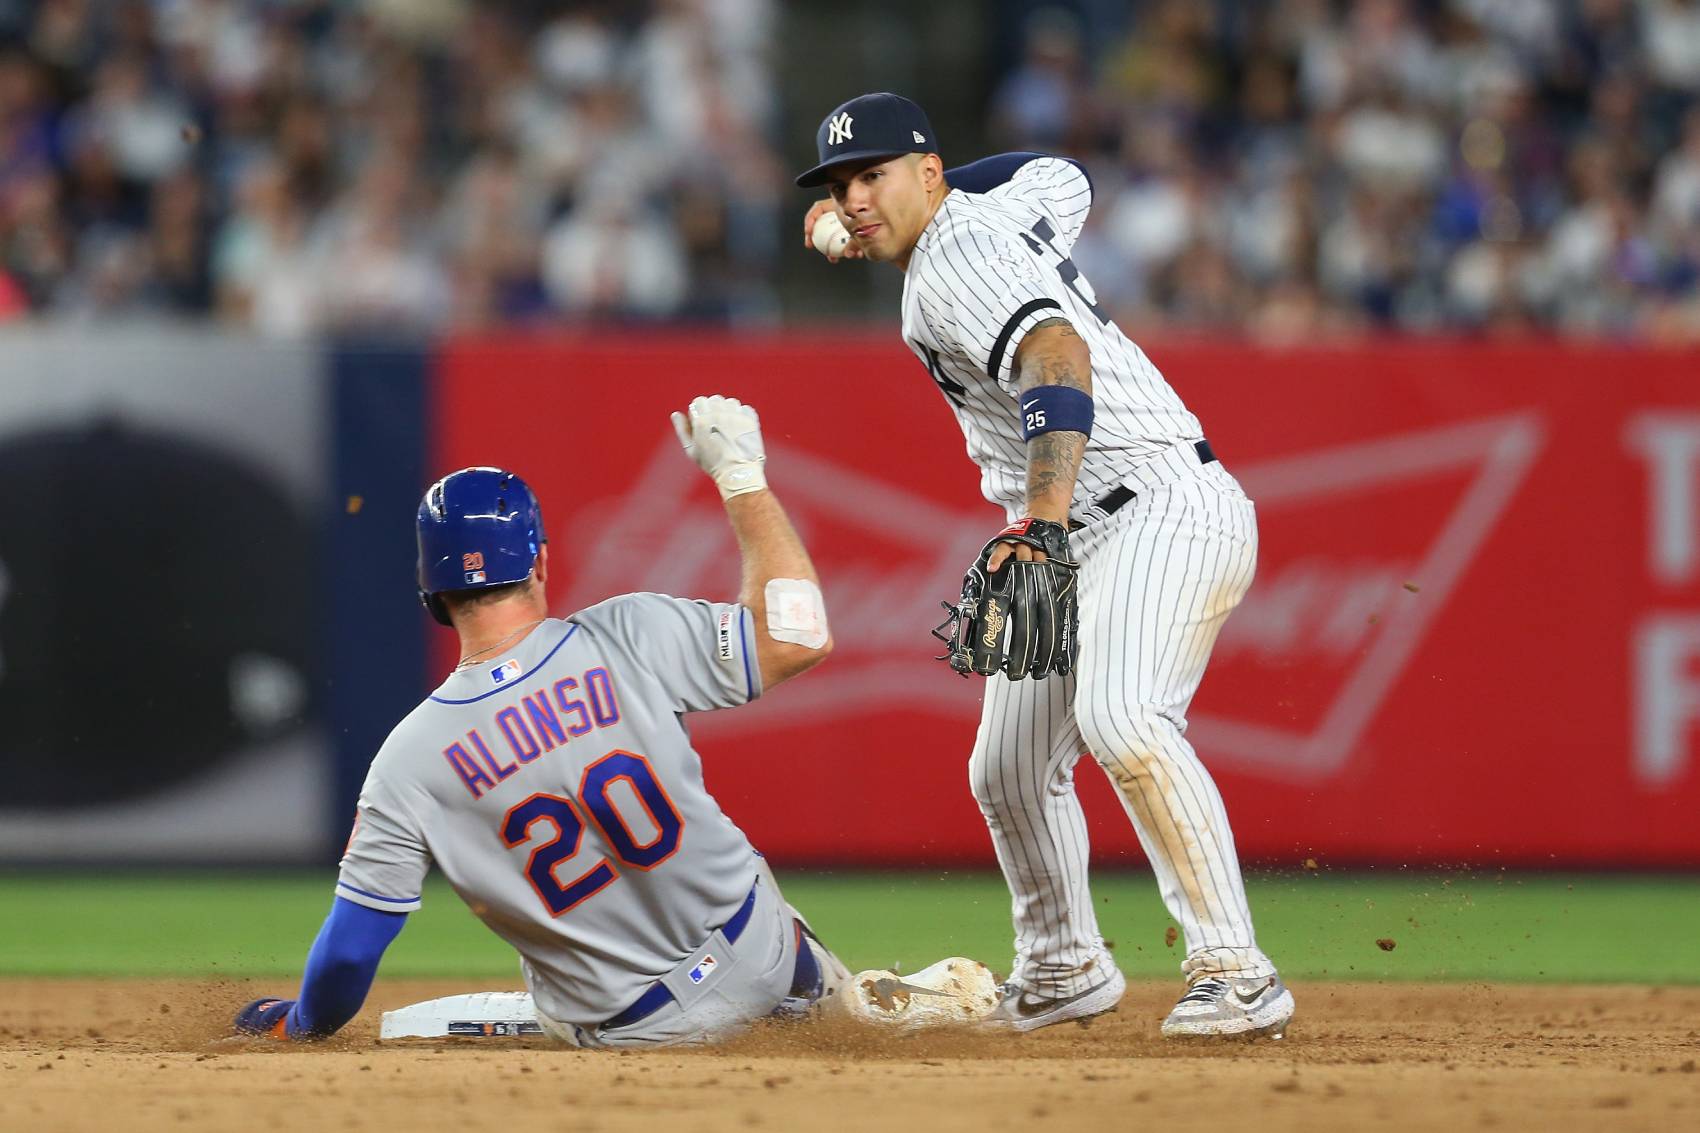 Gleyber Torres and the New York Yankees are expected to play Pete Alonso's New York Mets six times in 2020. Could the 2020 MLB season create more interleague rivalries? 